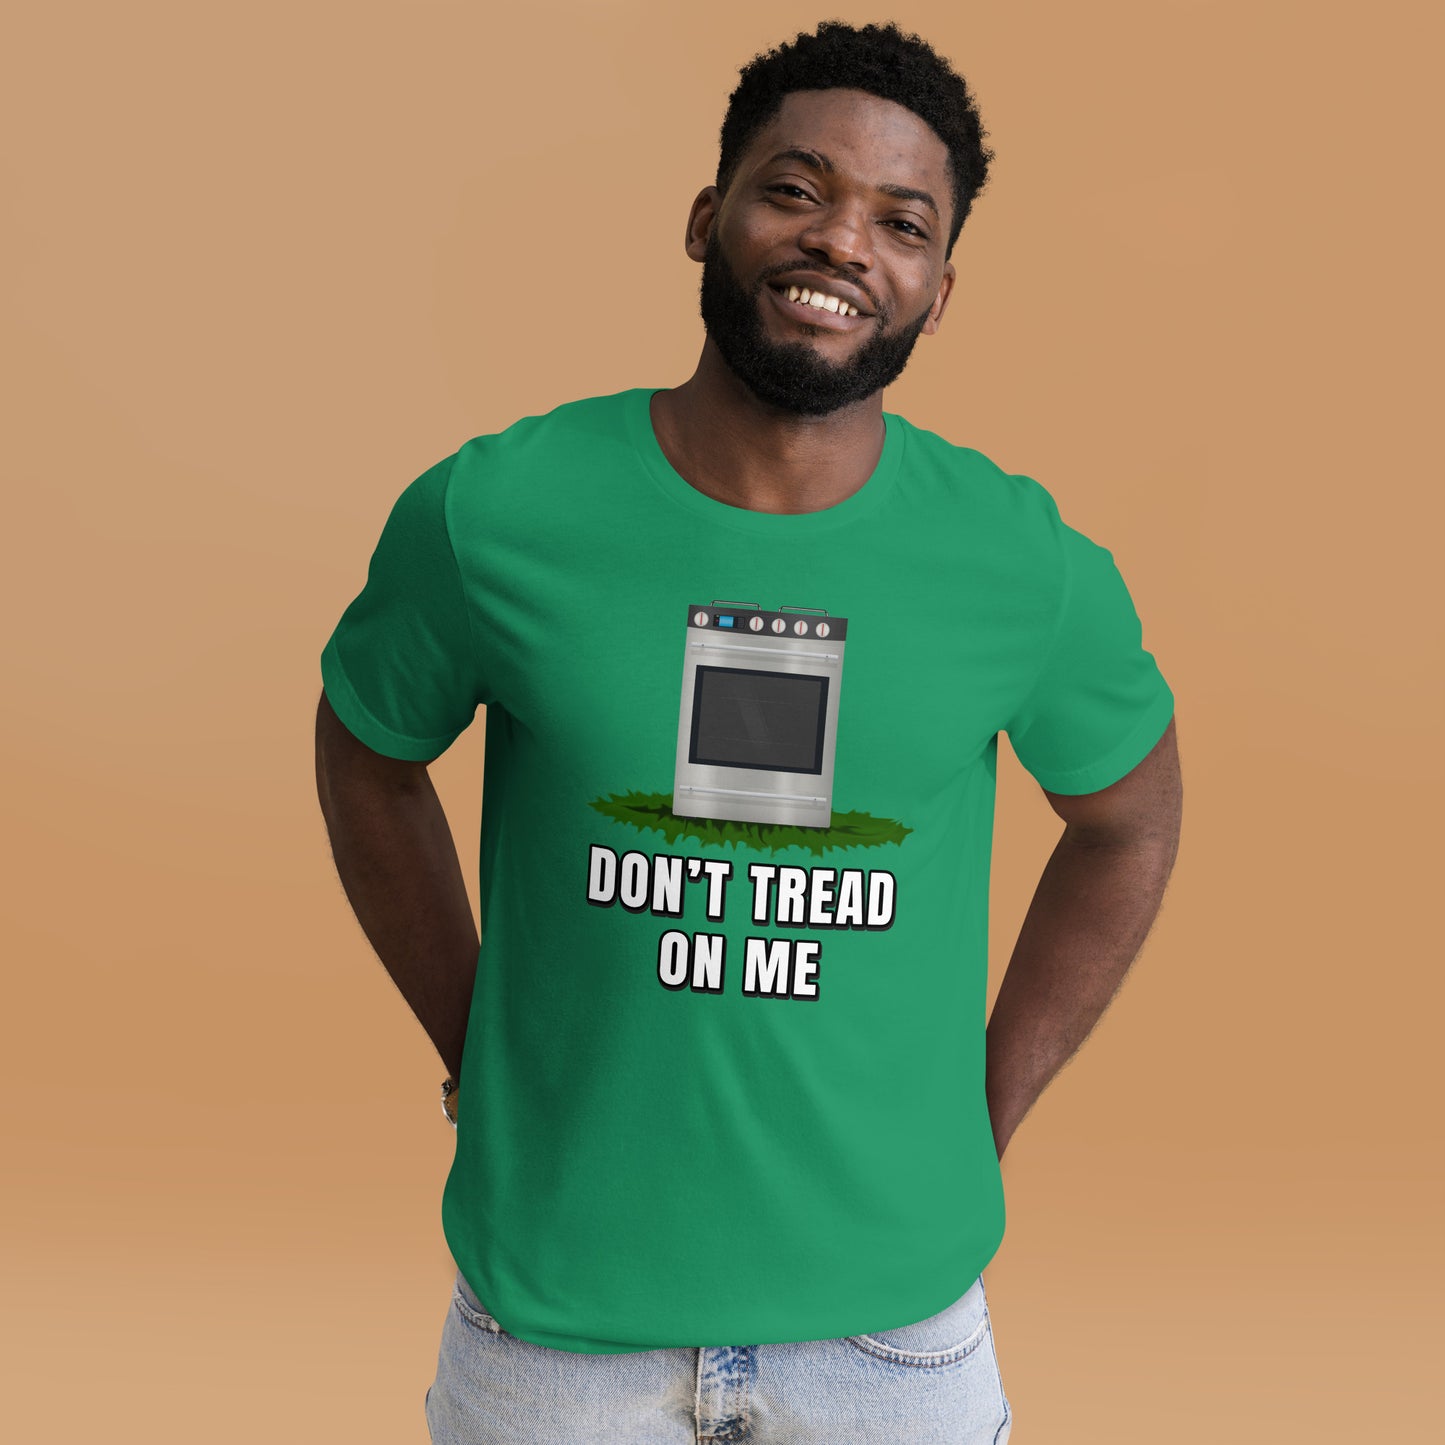 Don't tread on me - Gas stoves - Unisex t-shirt